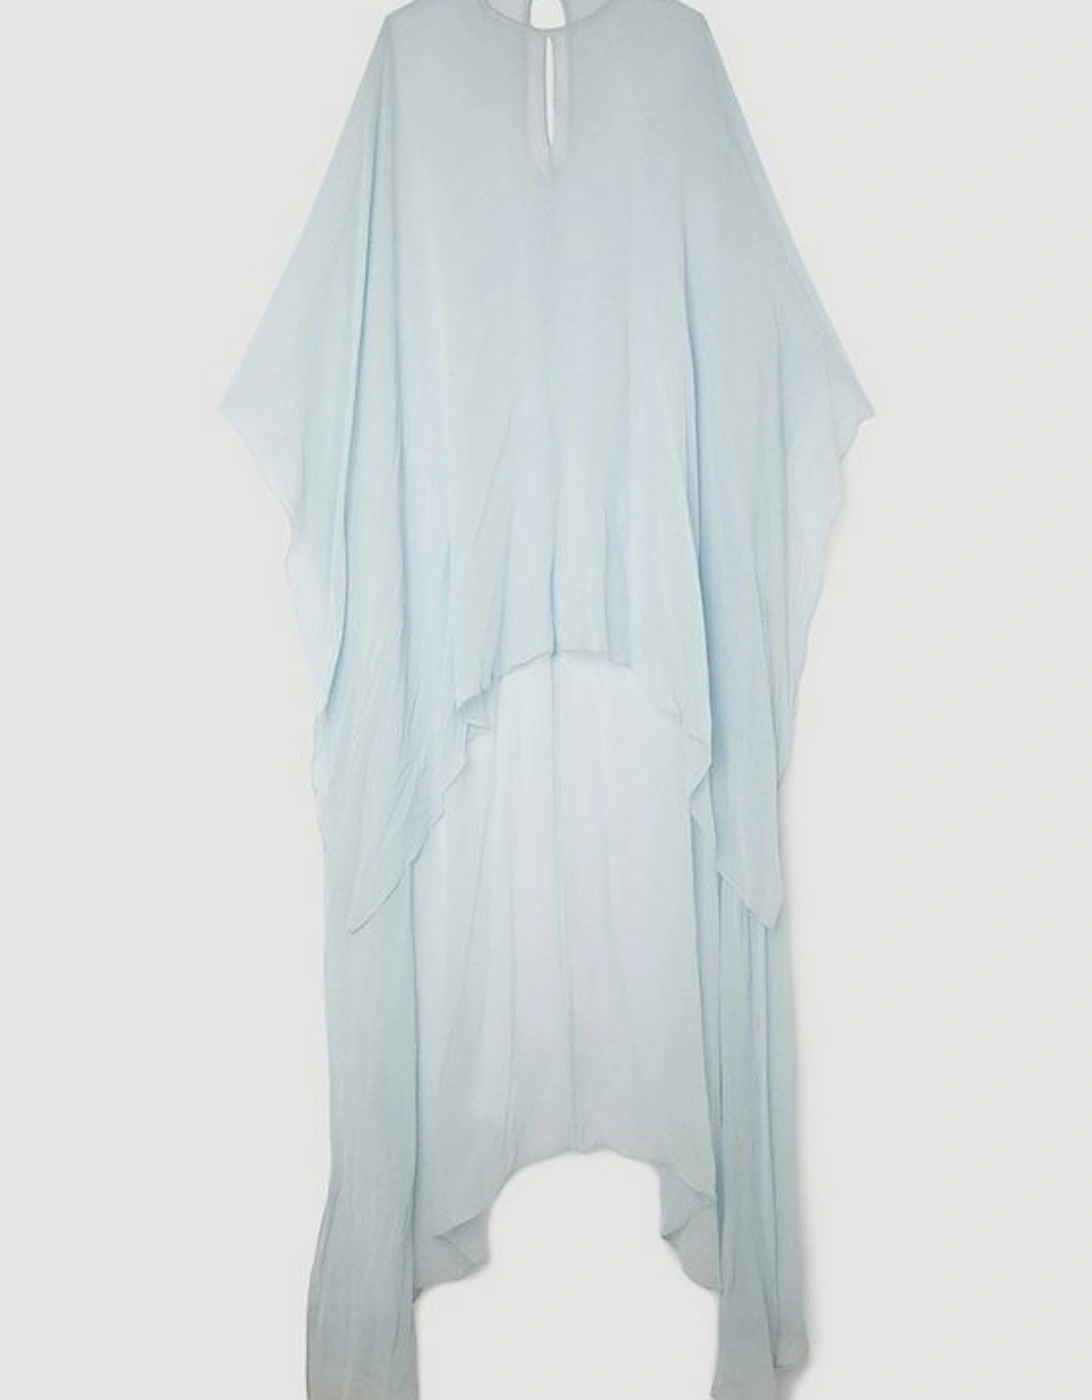 Sheer Cape Style High Low Woven Cape